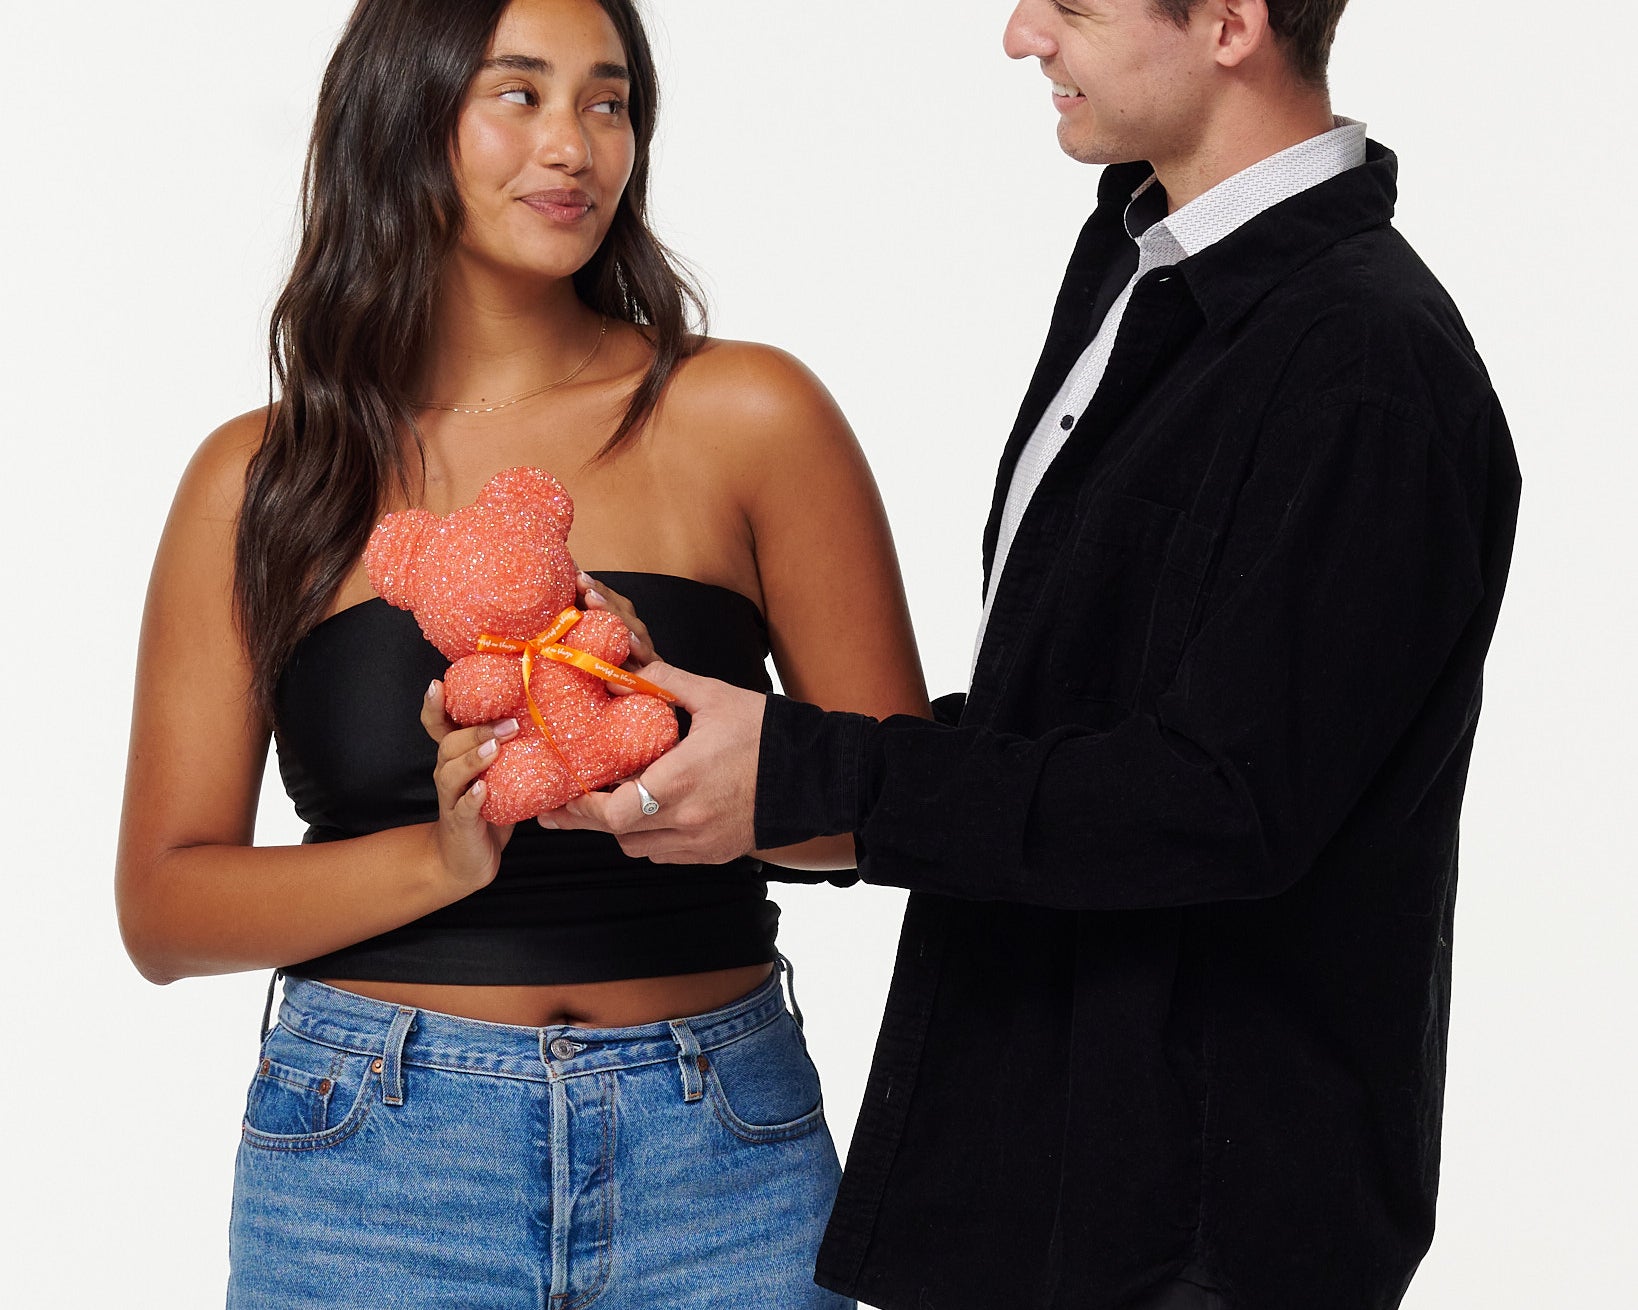 A woman in a black cropped top and blue jeans is holding an pink, sparkly teddy bear and looking at it fondly. Beside her, a man in a black jacket and white shirt is also looking at the teddy bear with a smile, his hands placed on the bear as they both share a moment of joy.